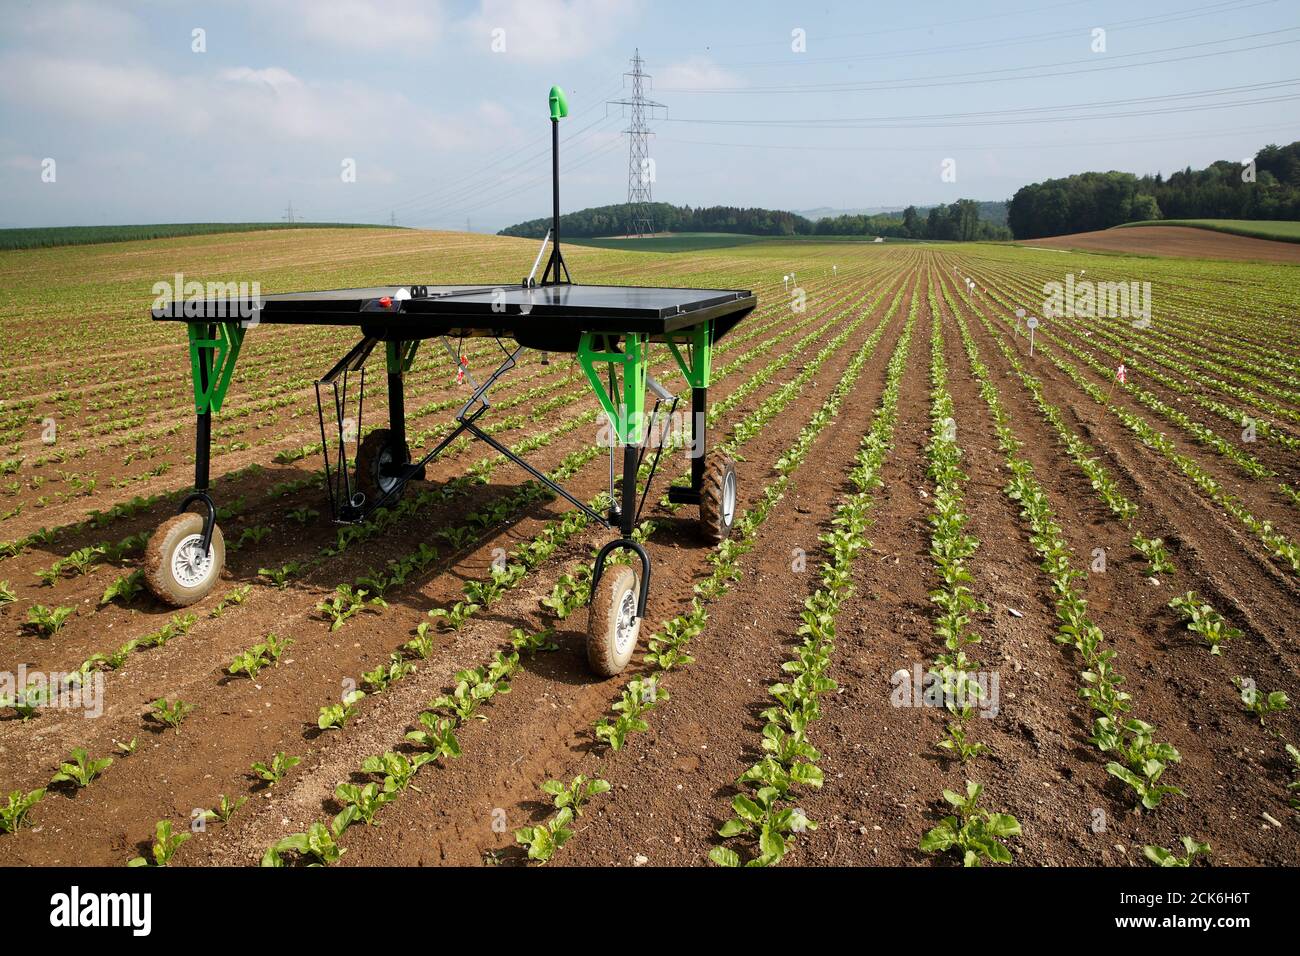 The prototype of an autonomous weeding machine by Swiss start-up ecoRobotix  is pictured during tests on a sugar beet field near Bavois, Switzerland May  18, 2018. REUTERS/Denis Balibouse TPX IMAGES OF THE